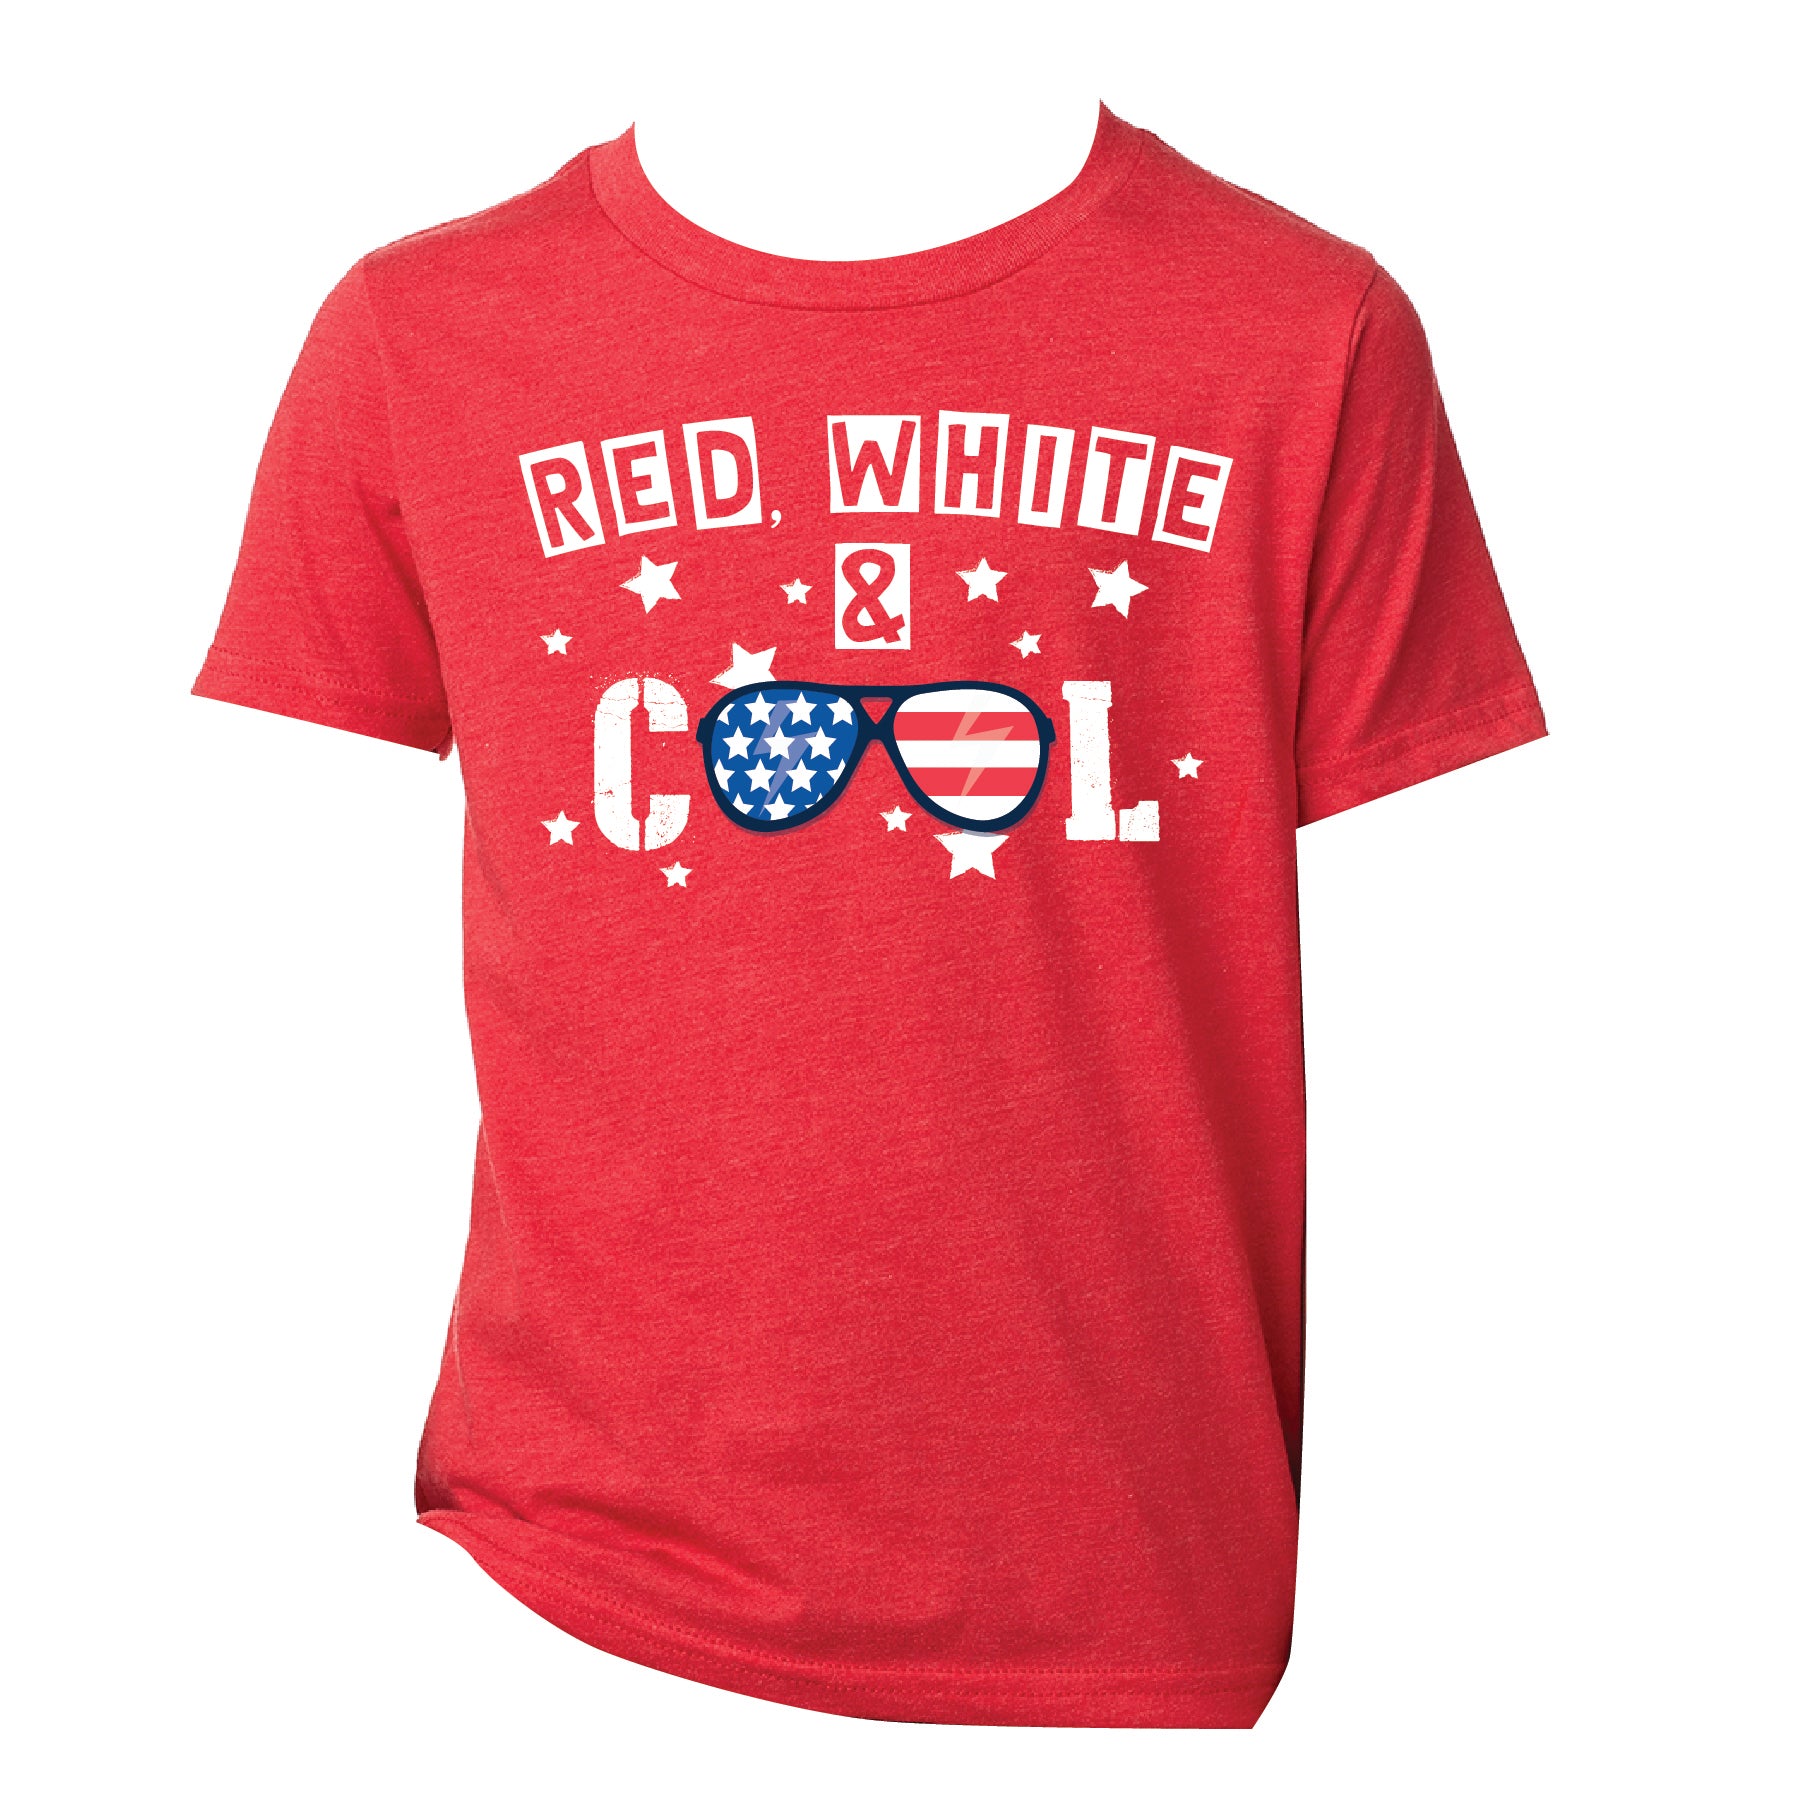 Jane Marie - Red, White & Cool Kid's T-shirt